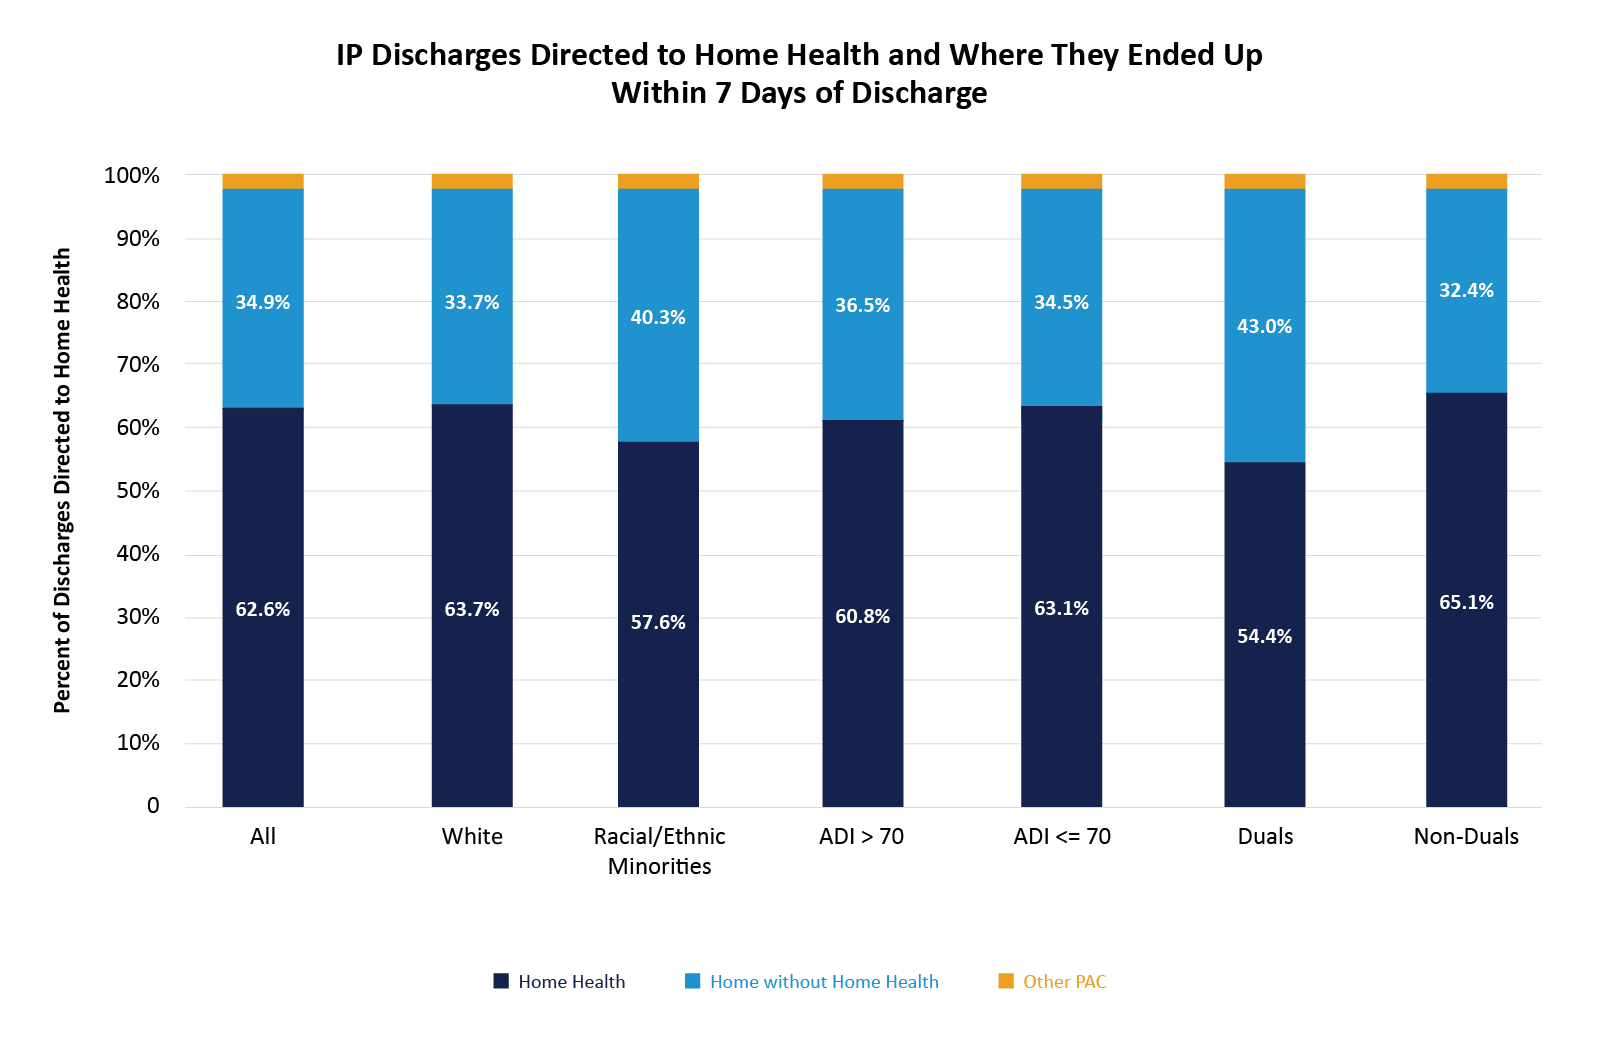 IP Discharges Directed to Home Health and Where They Ended Up Within 7 Days of Discharge